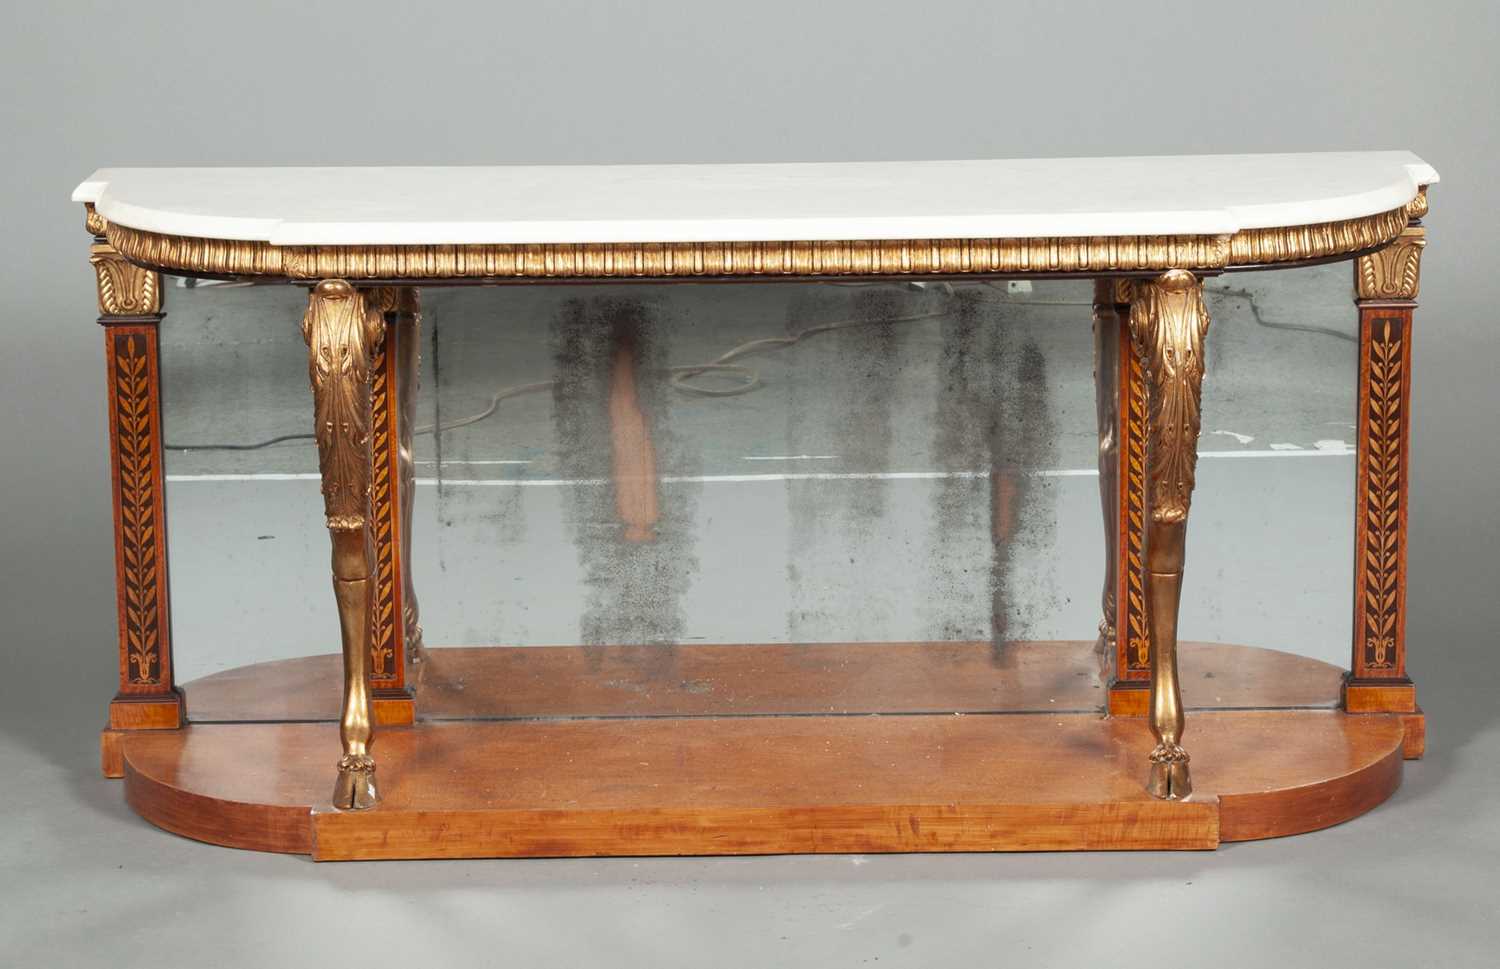 Lot 173 - Italian Neoclassical Style Inlaid Partial Giltwood Mahogany Console